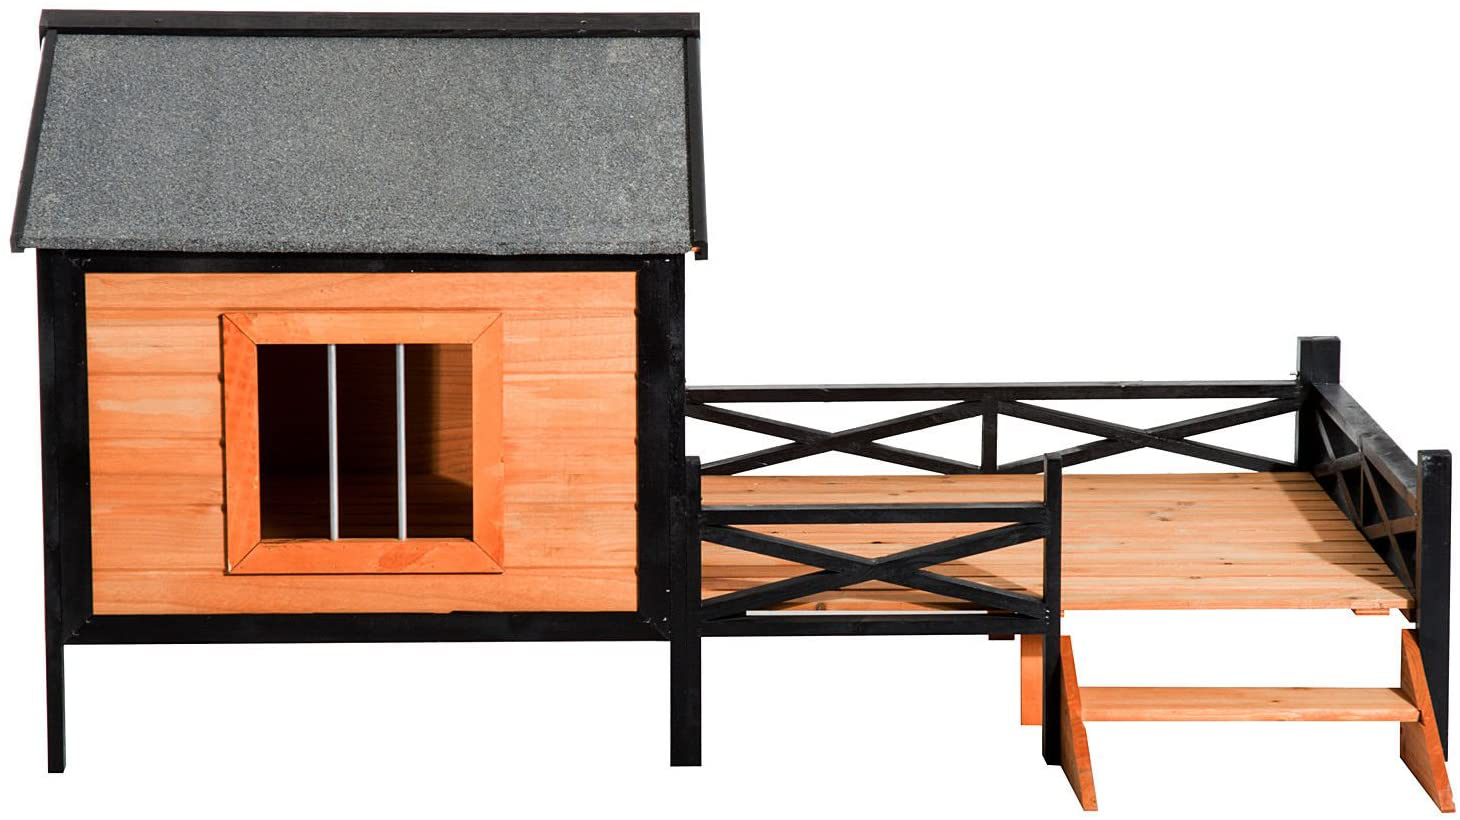 Pawhut 67" Large Wooden Cabin Style Elevated Outdoor Dog House with Porch